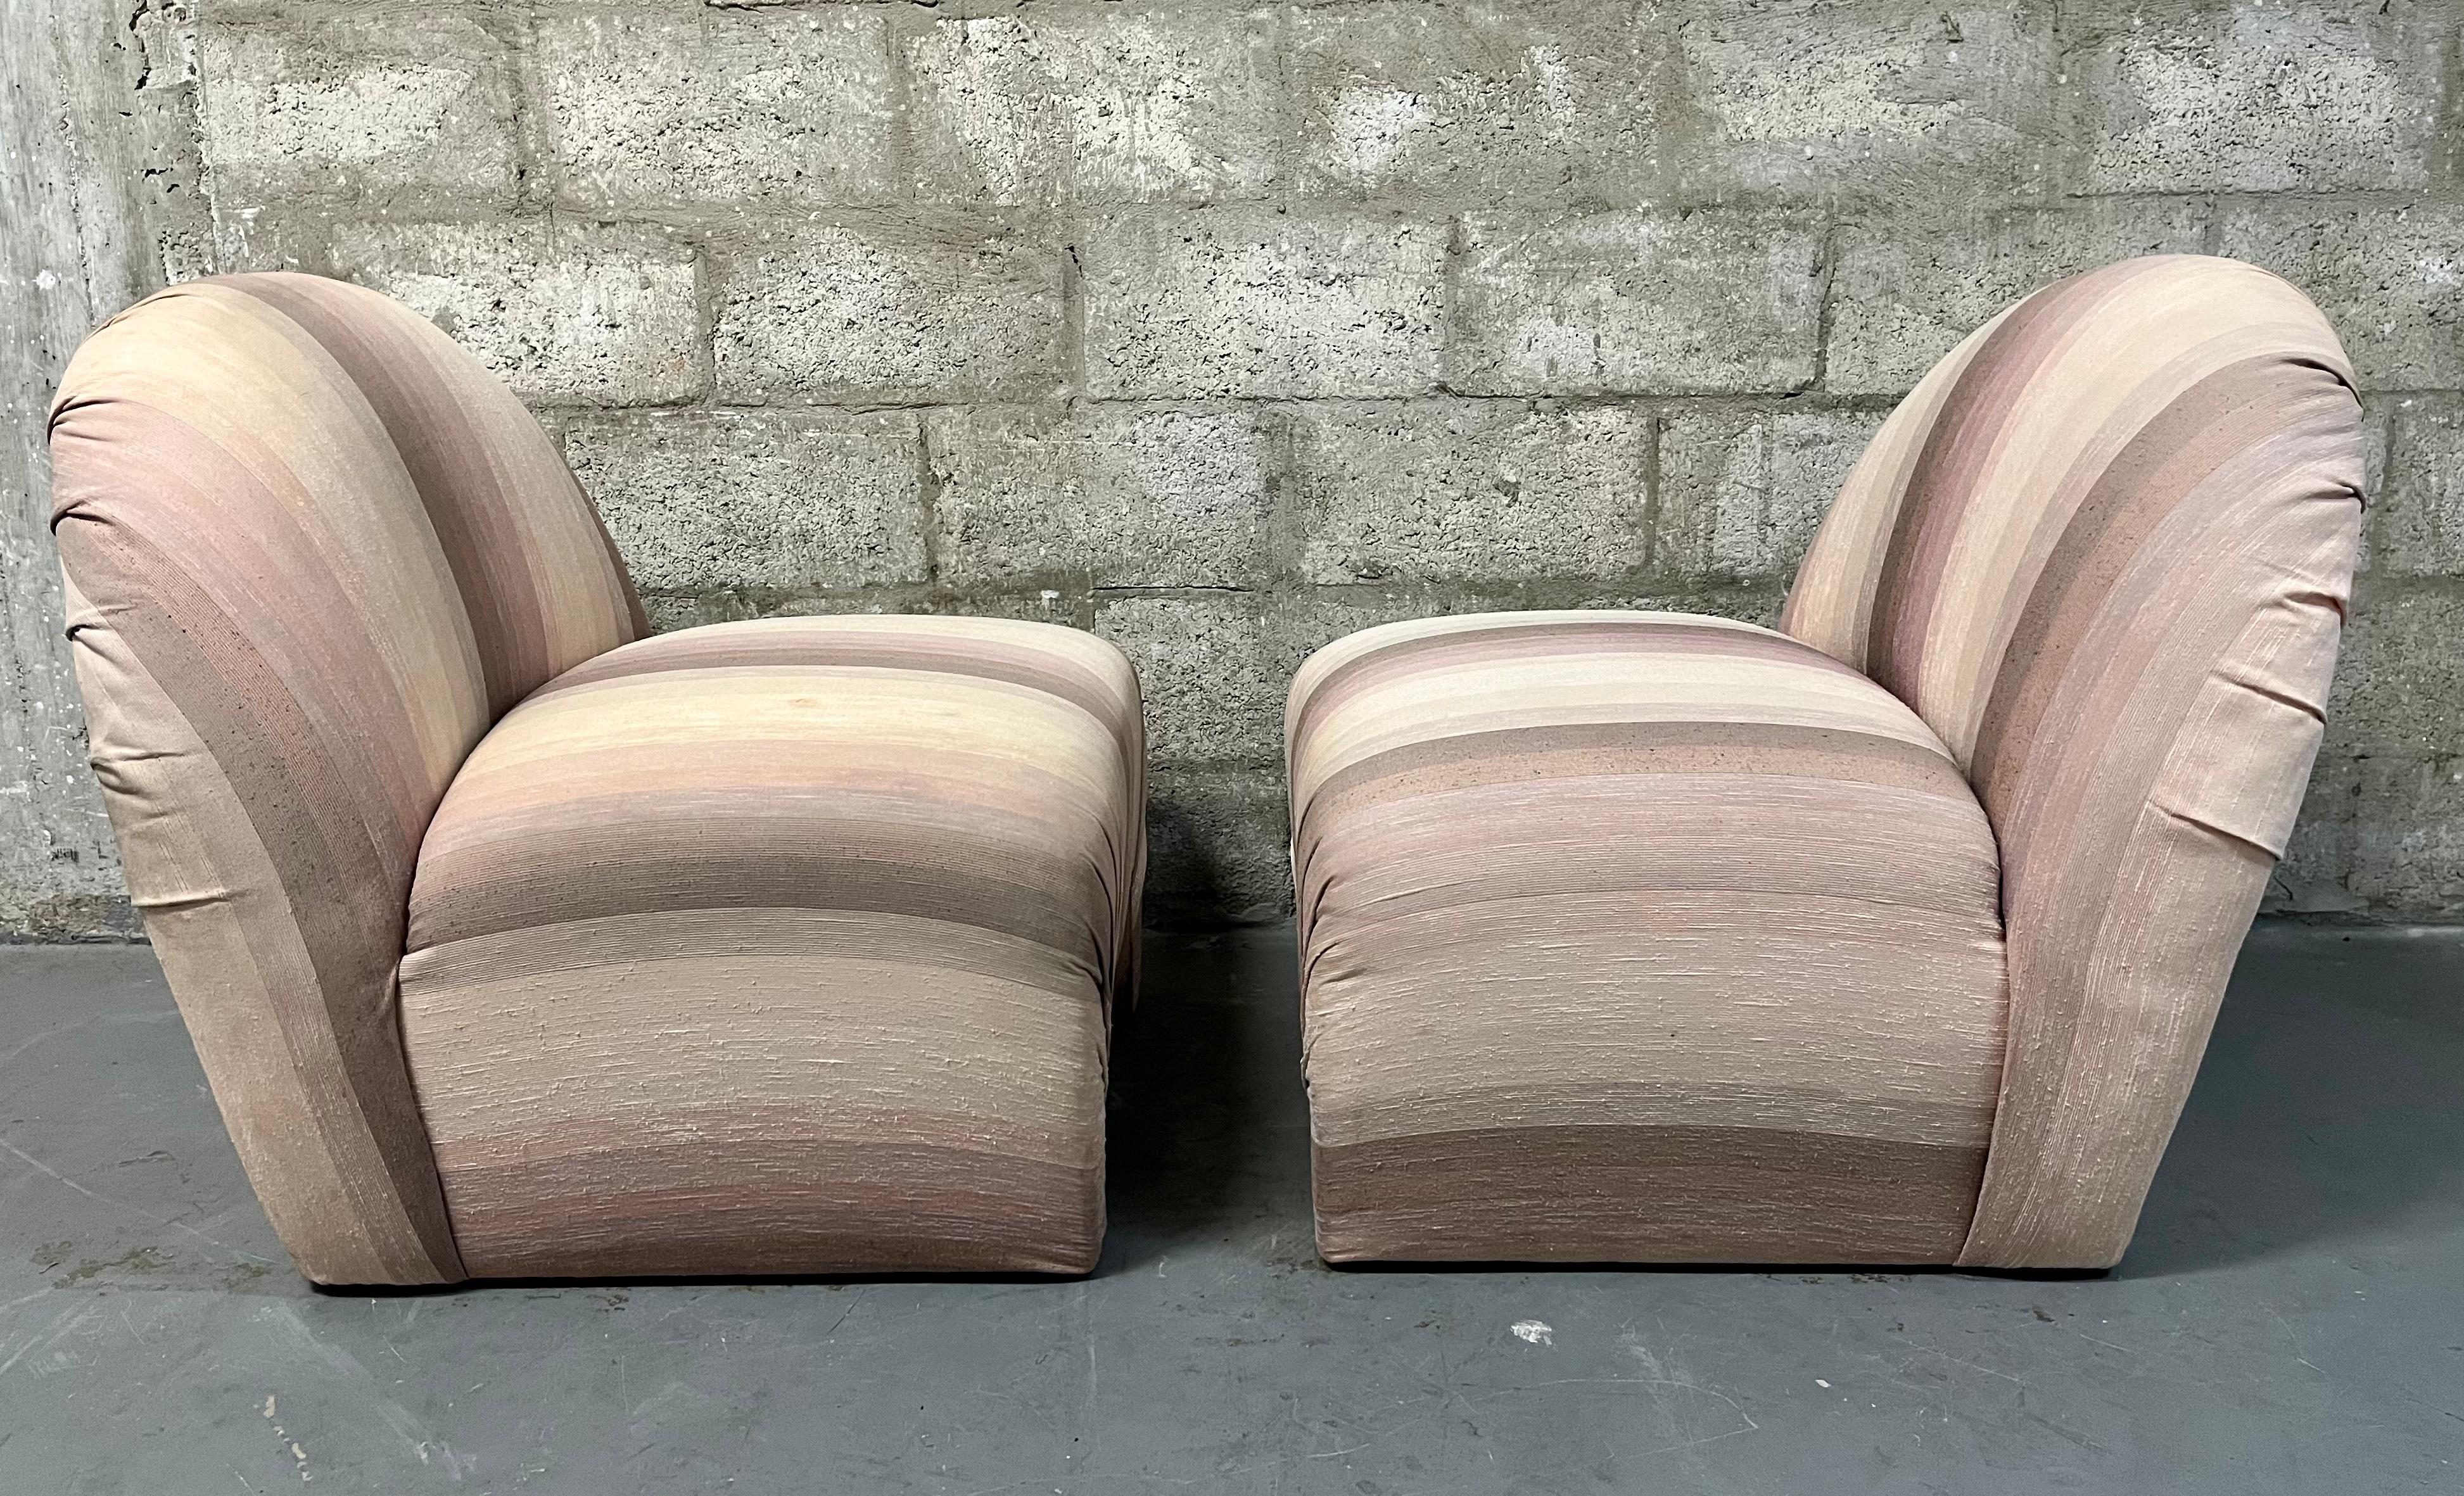 Late 20th Century A Pair of Lounge Chairs in the Vladimir Kagan for Weiman Style. Circa 1980s For Sale